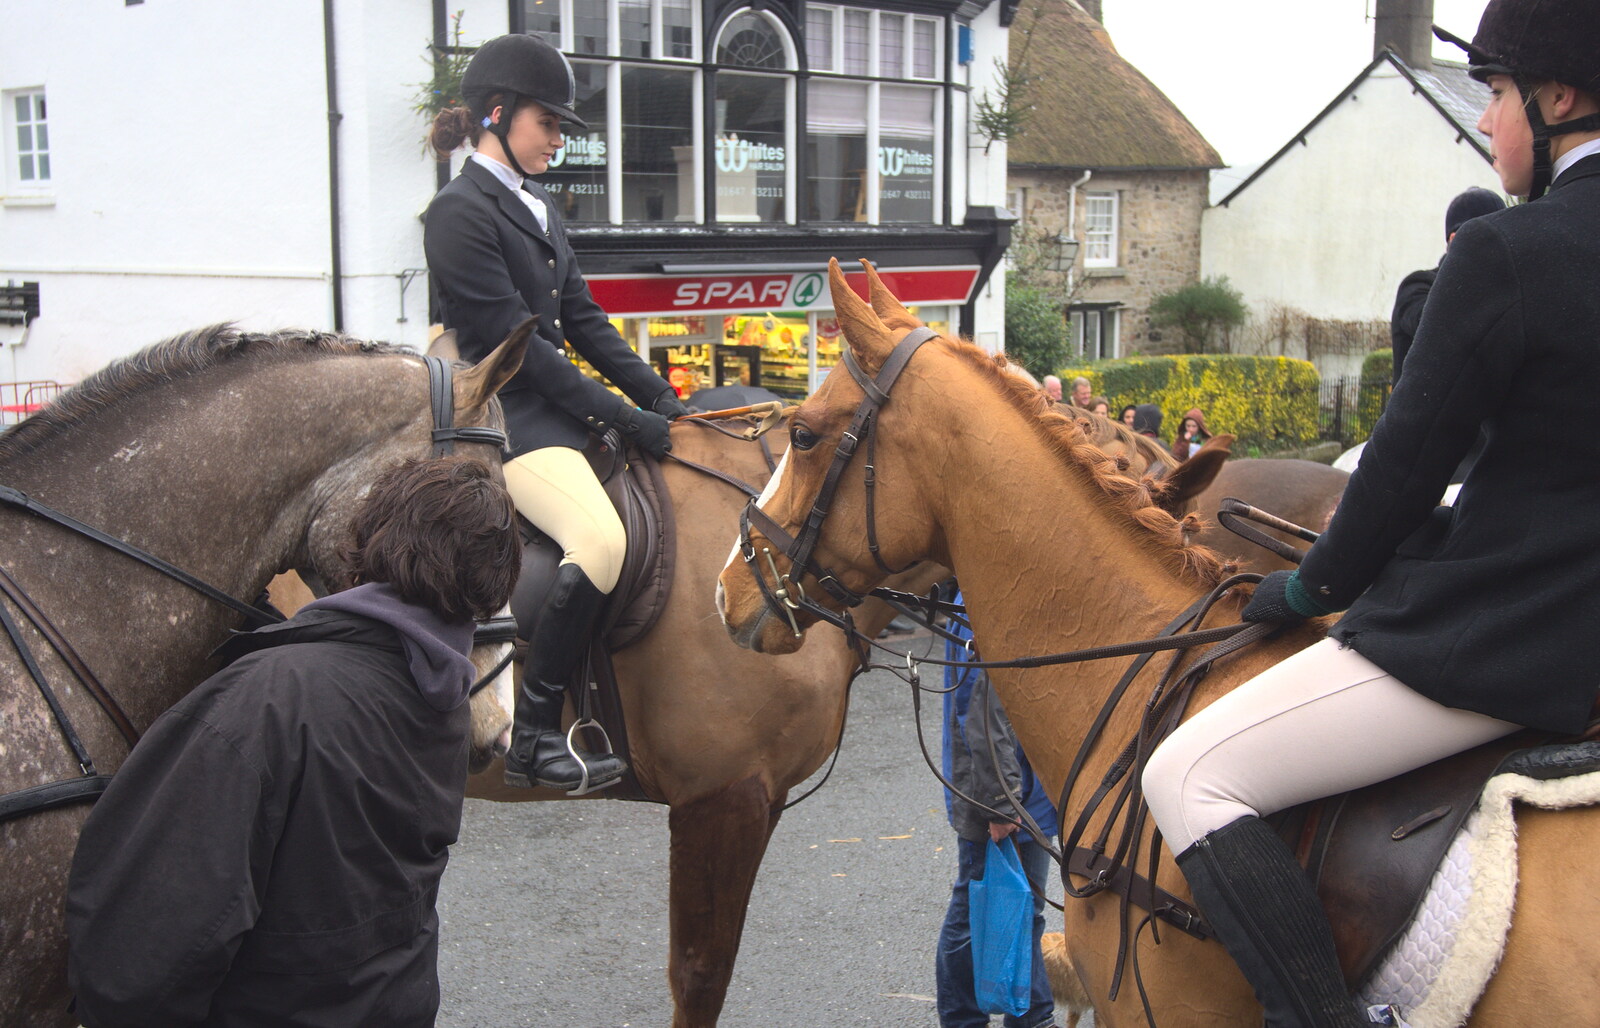 Riders of the Mid Devon hunt join in from The Boxing Day Hunt, Chagford, Devon - 26th December 2012